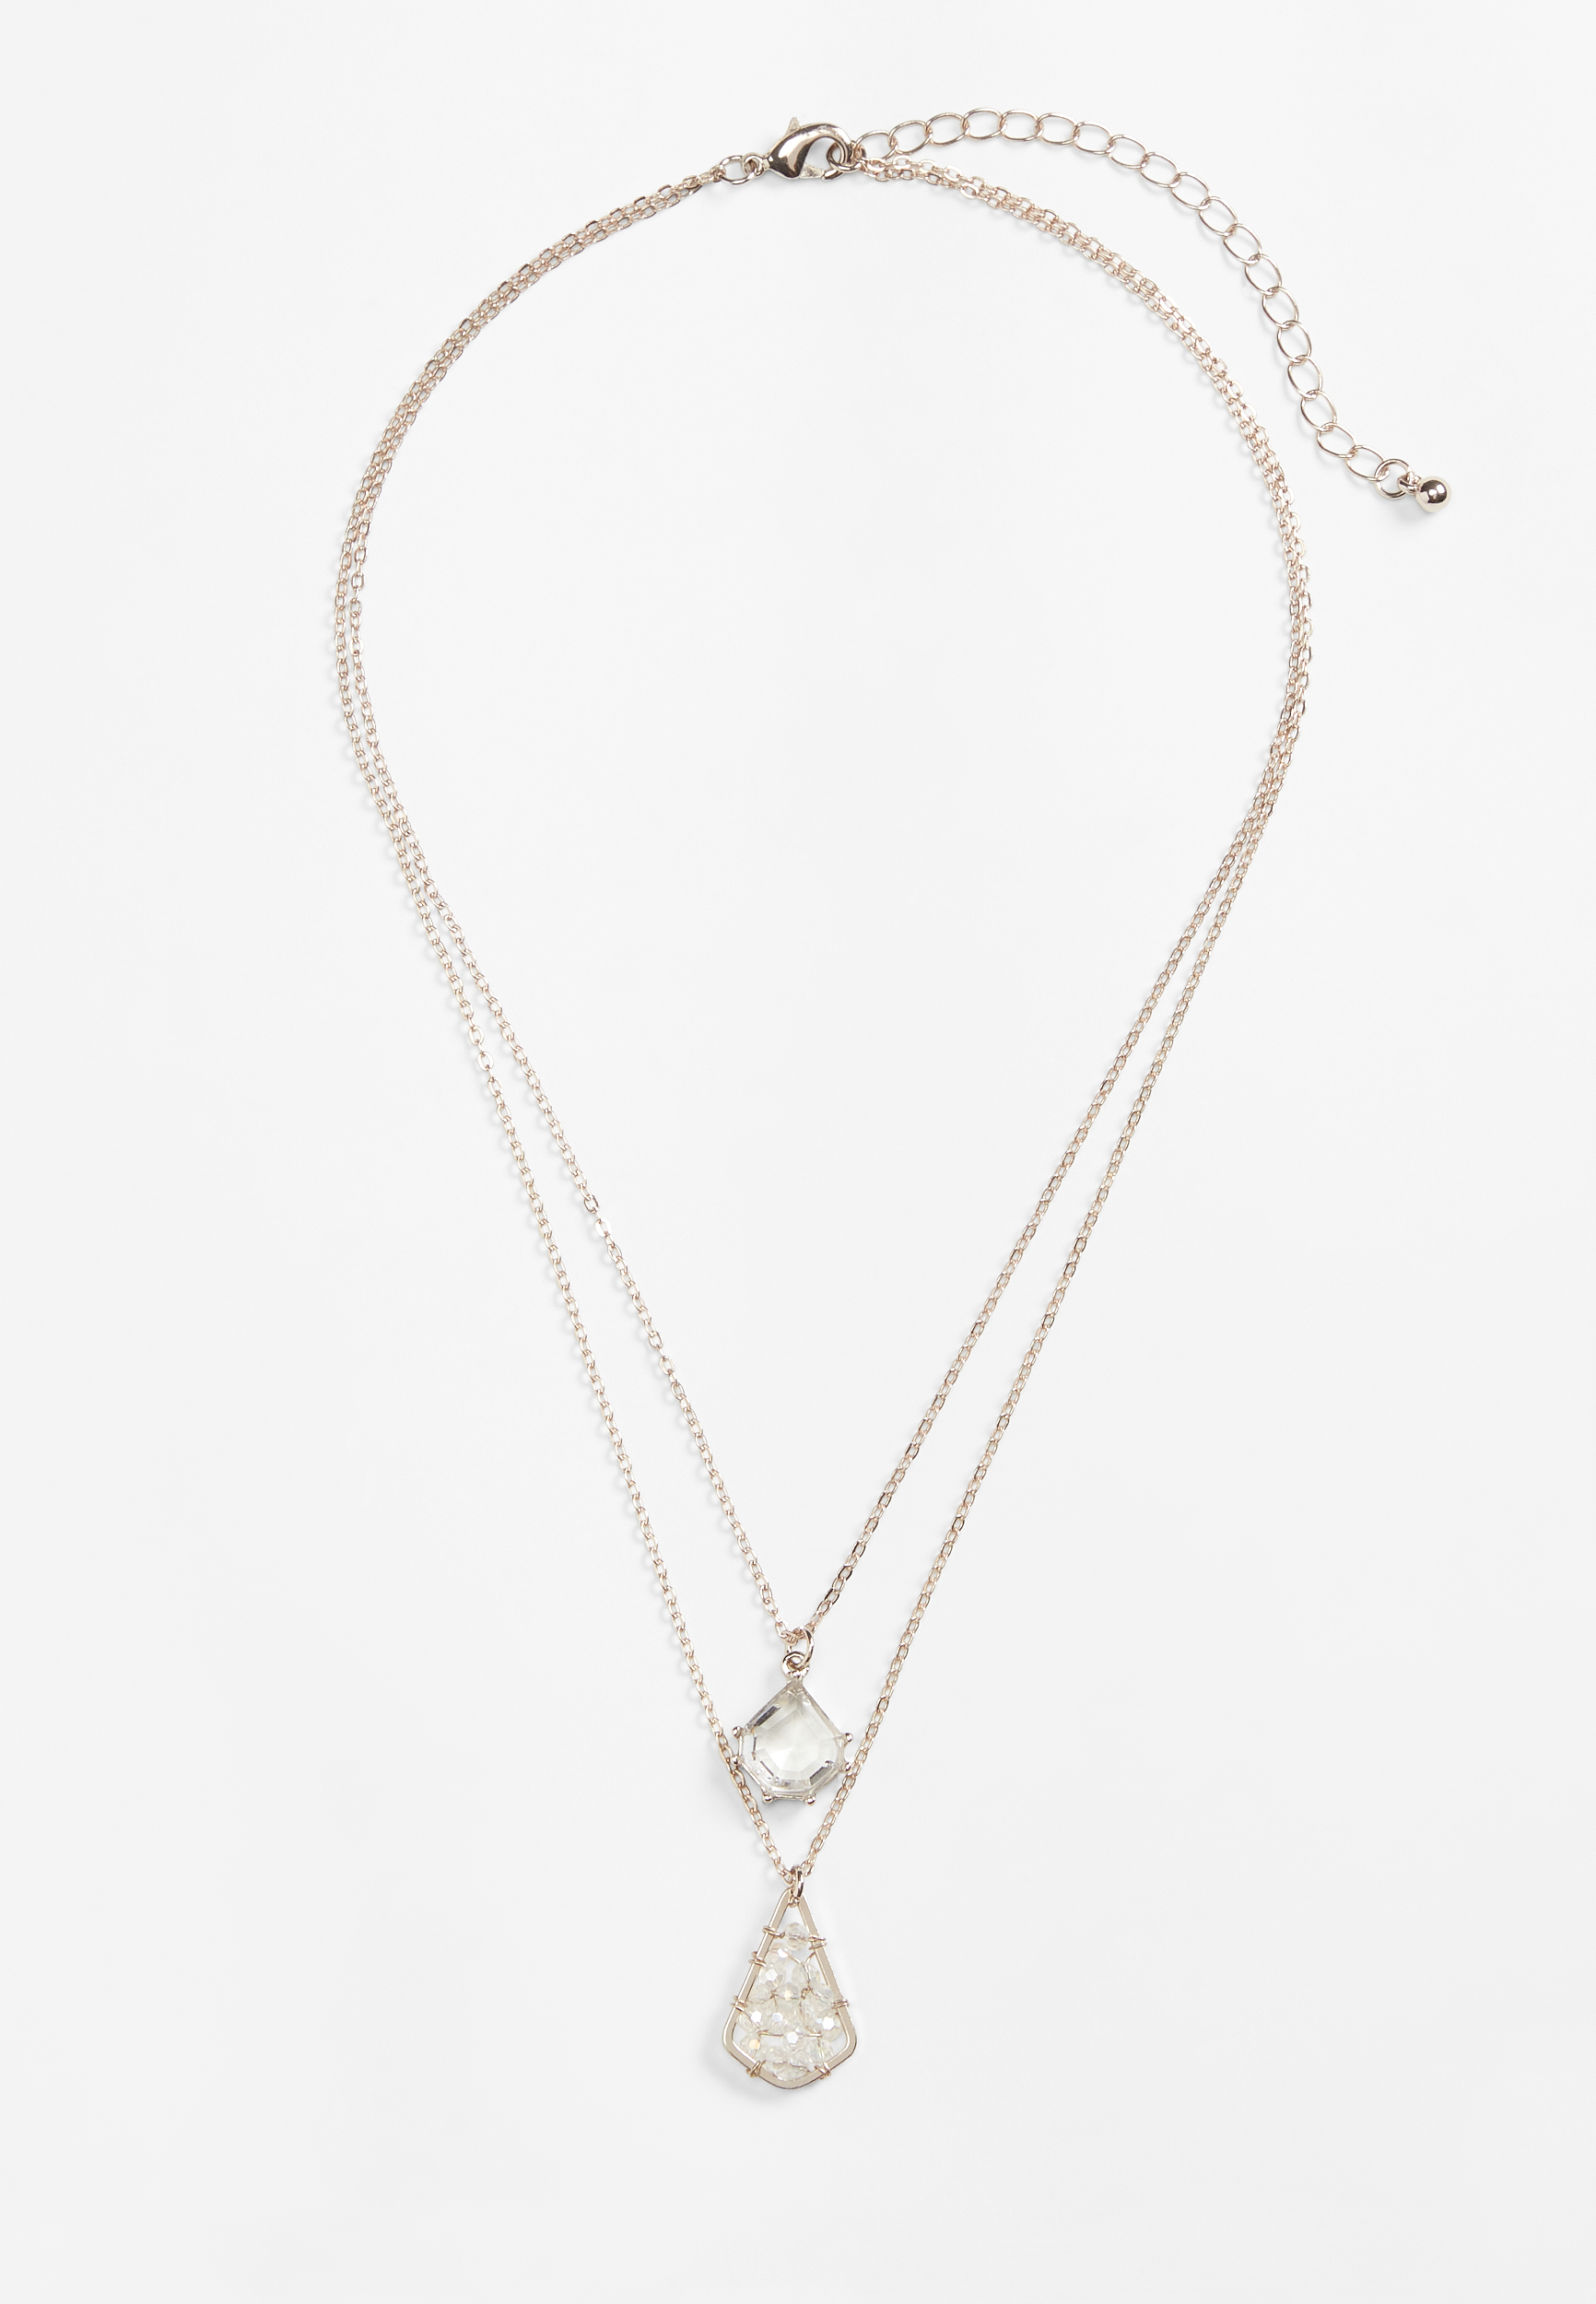 Gold Layered Faux Stone Pendant Necklace | maurices